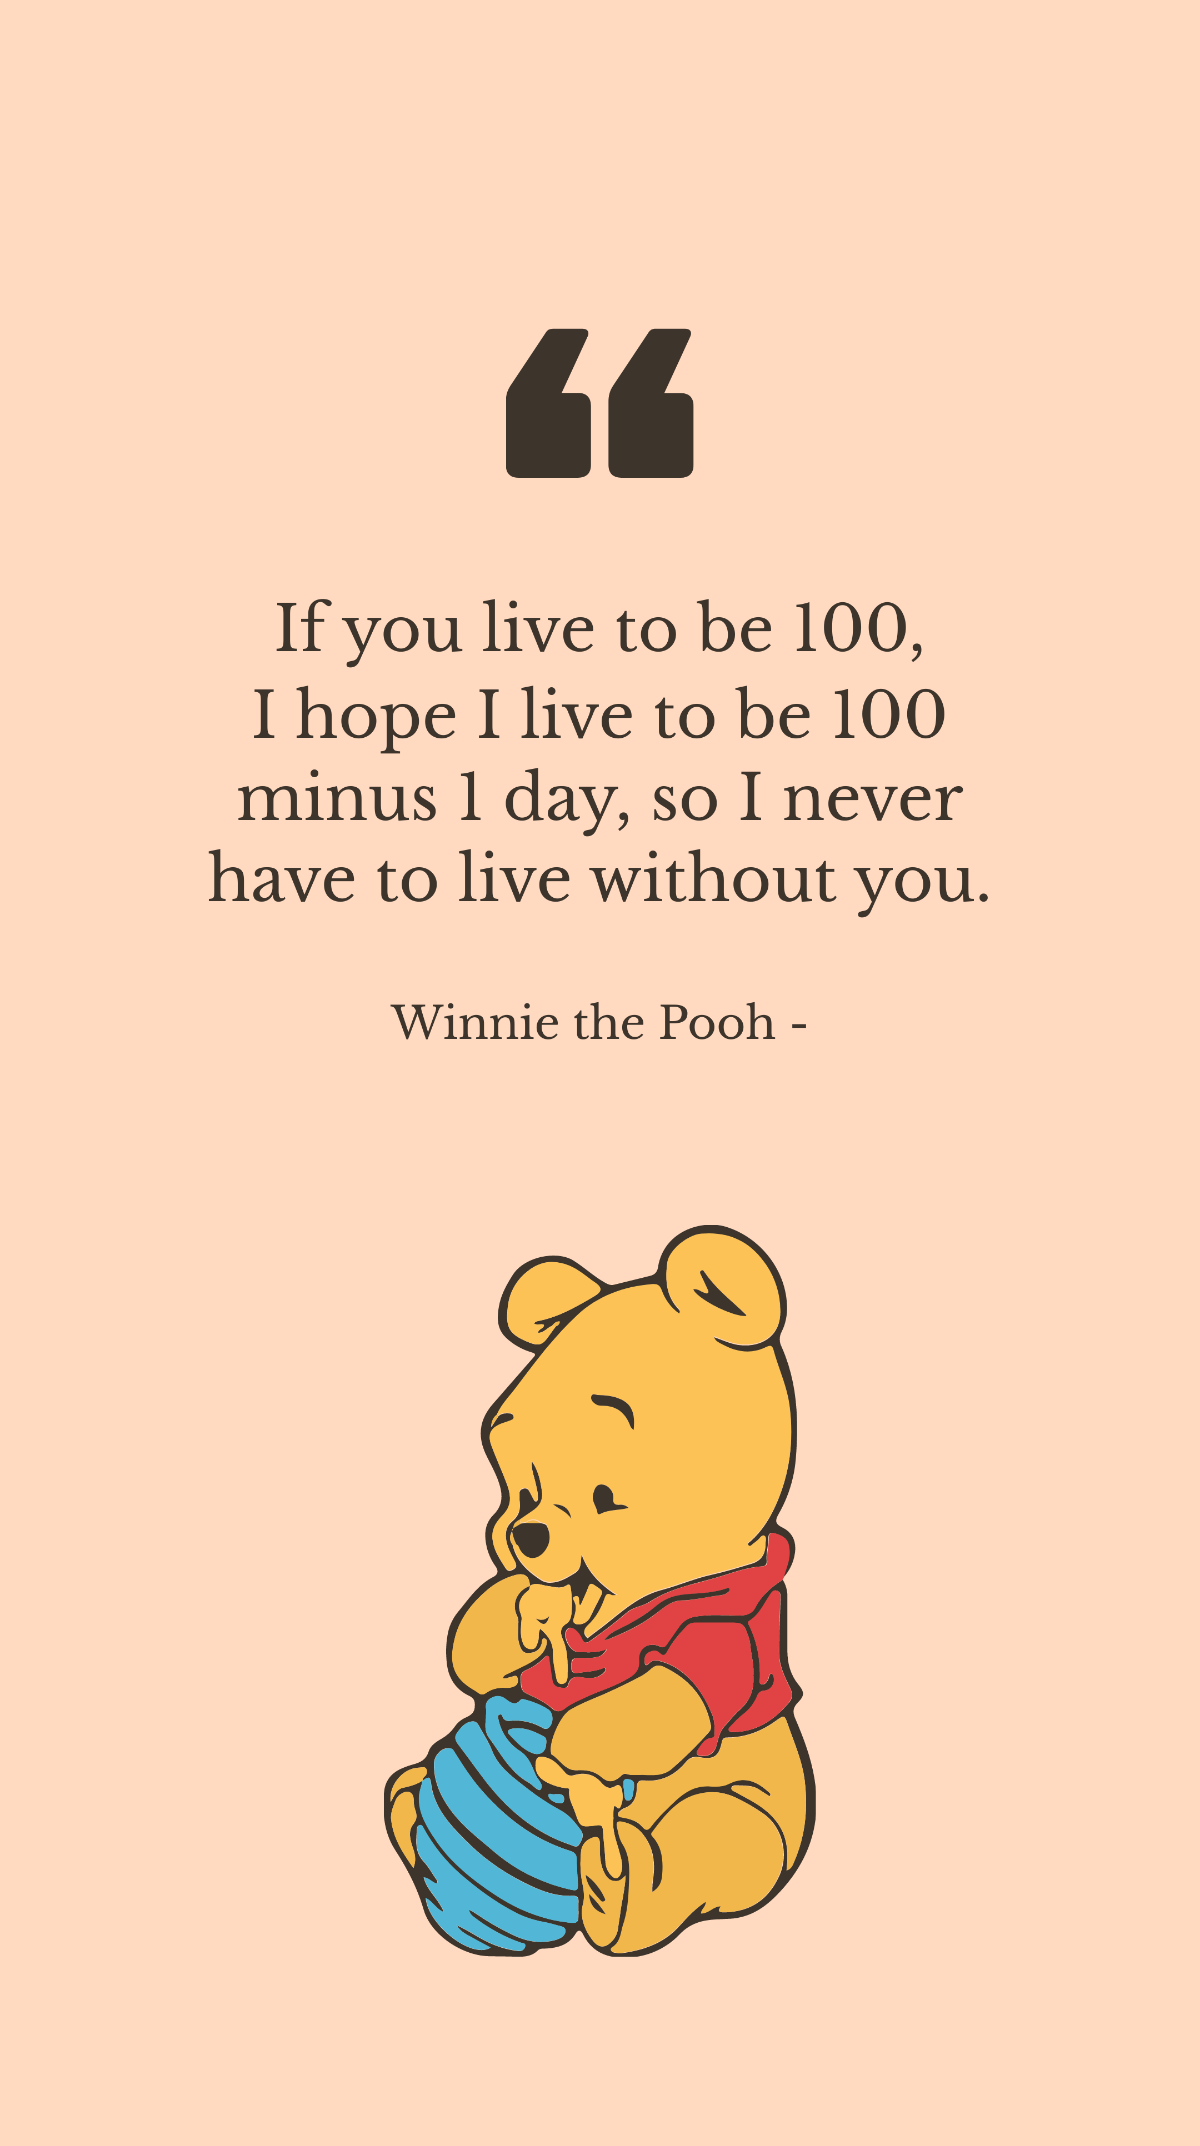 Winnie the Pooh - If you live to be 100, I hope I live to be 100 minus 1 day, so I never have to live without you. Template